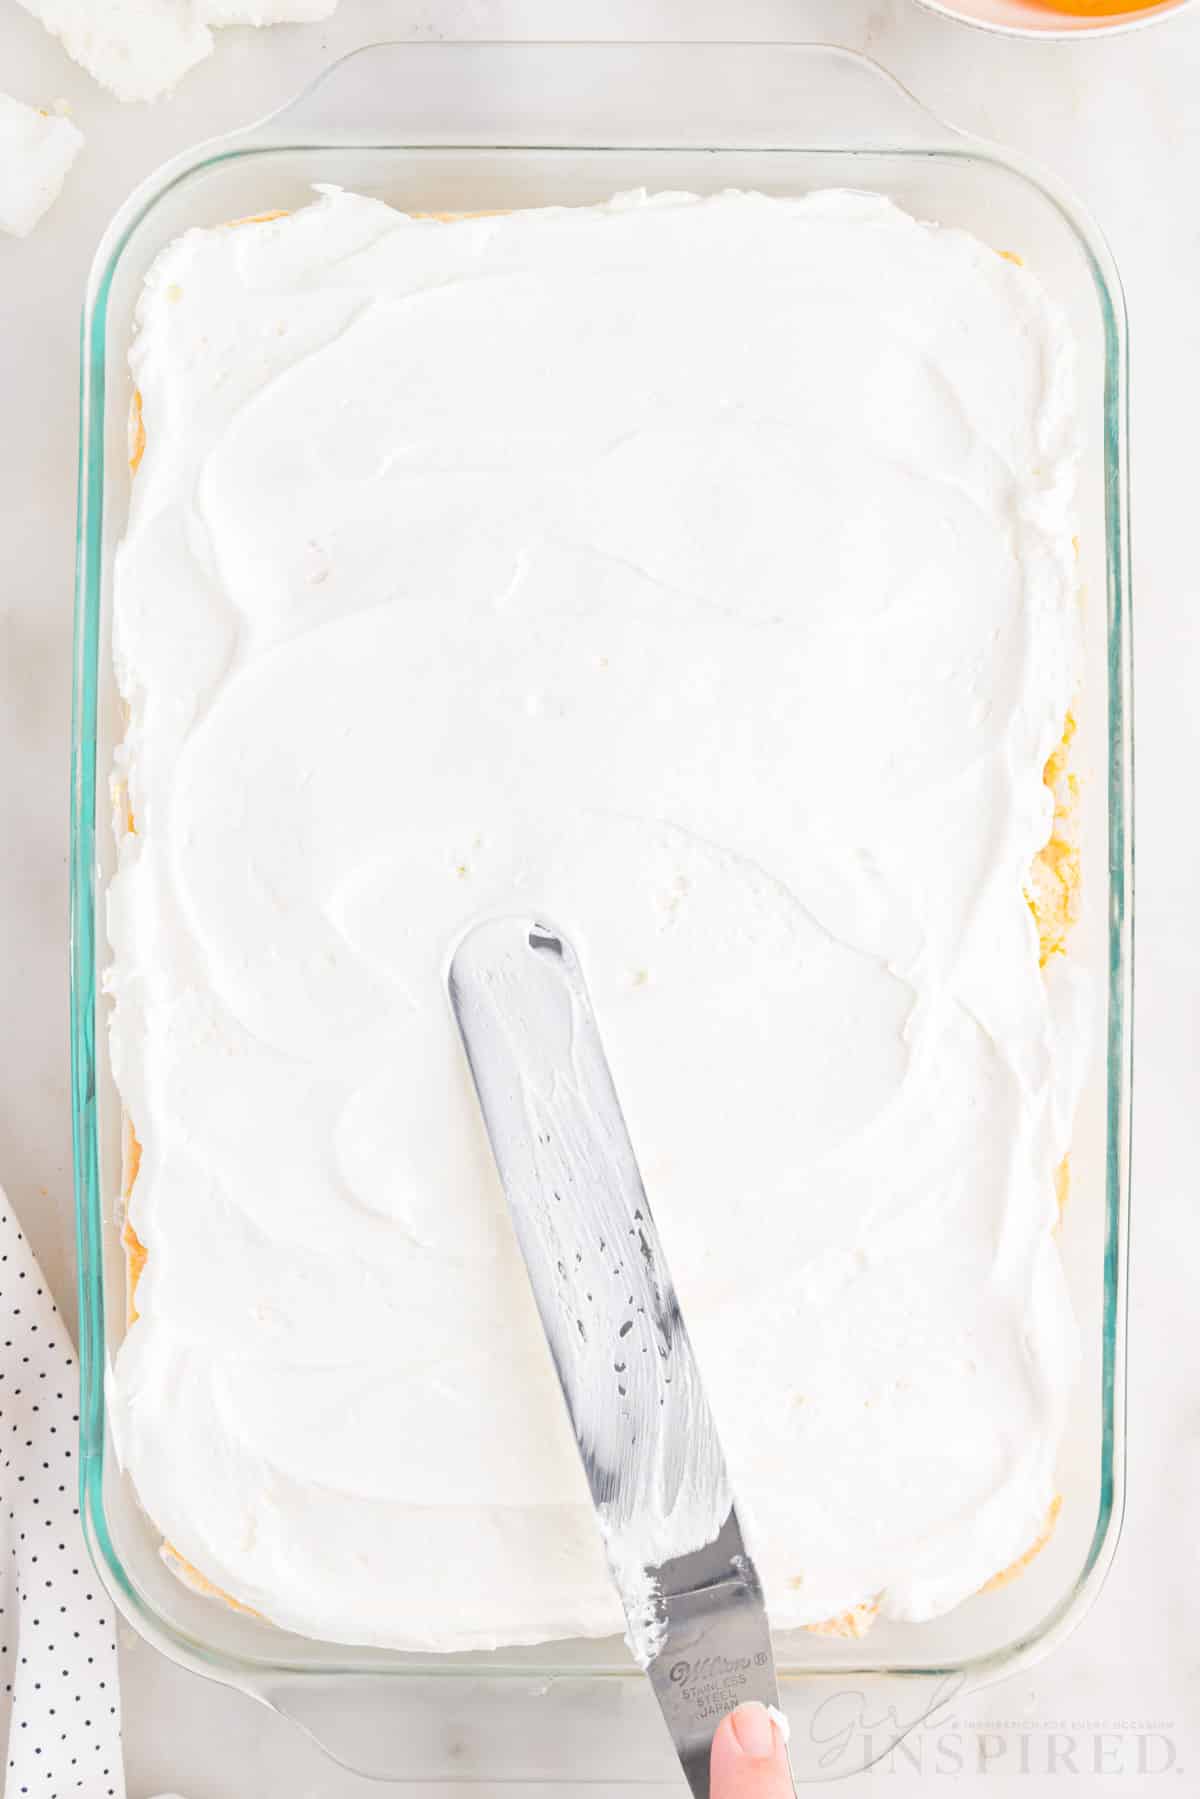 Cool whip spread out over the Apricot Delight in a 9x13.